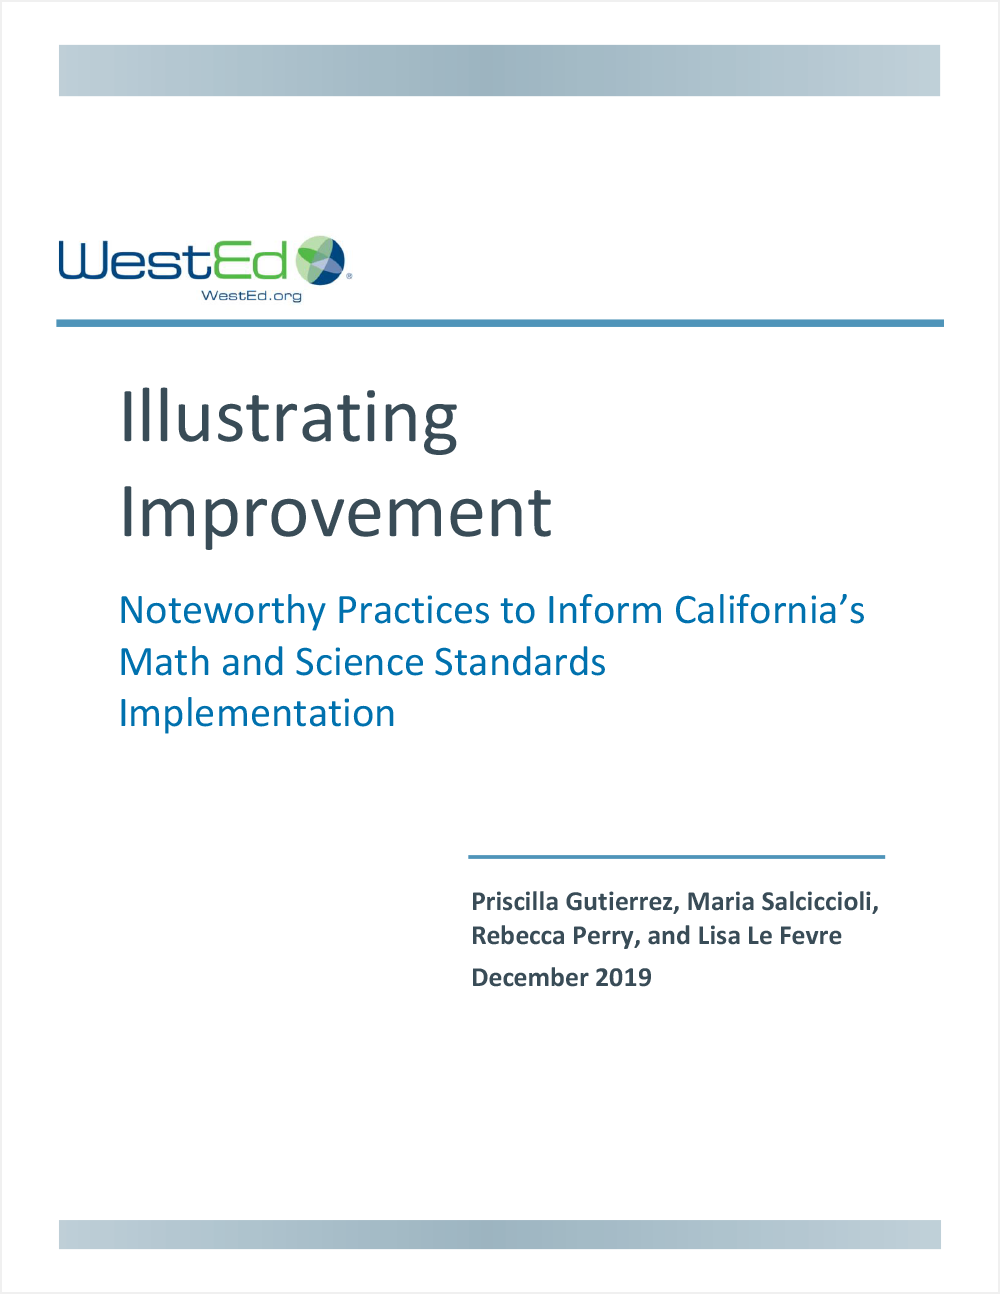 Illustrating Improvement: Noteworthy Practices to Inform California’s Math and Science Standards Implementation